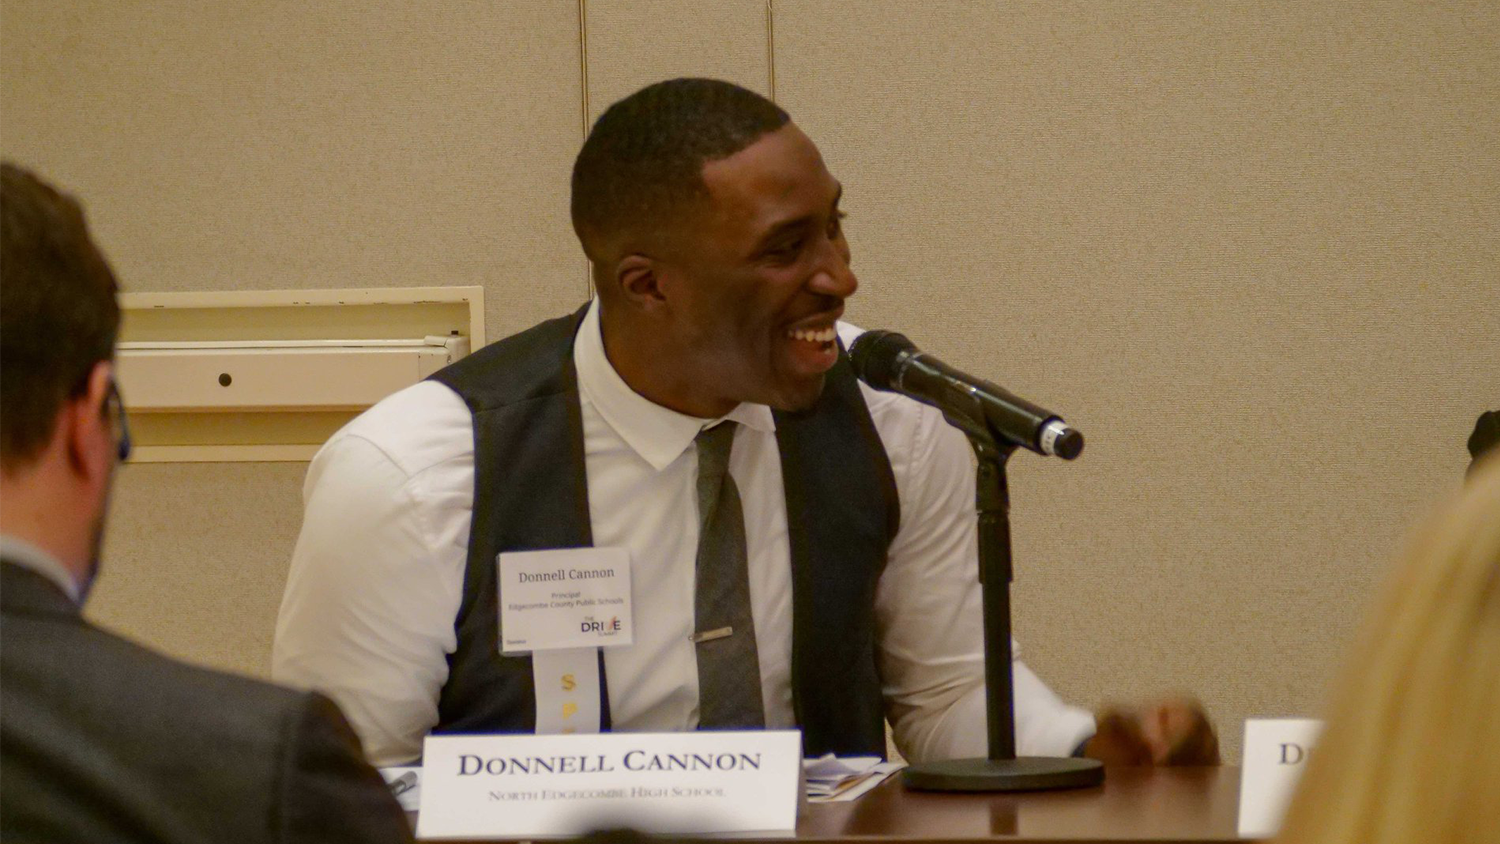 NELA alum Donnell Cannon spoke at the DRIVE Summit at NC State University